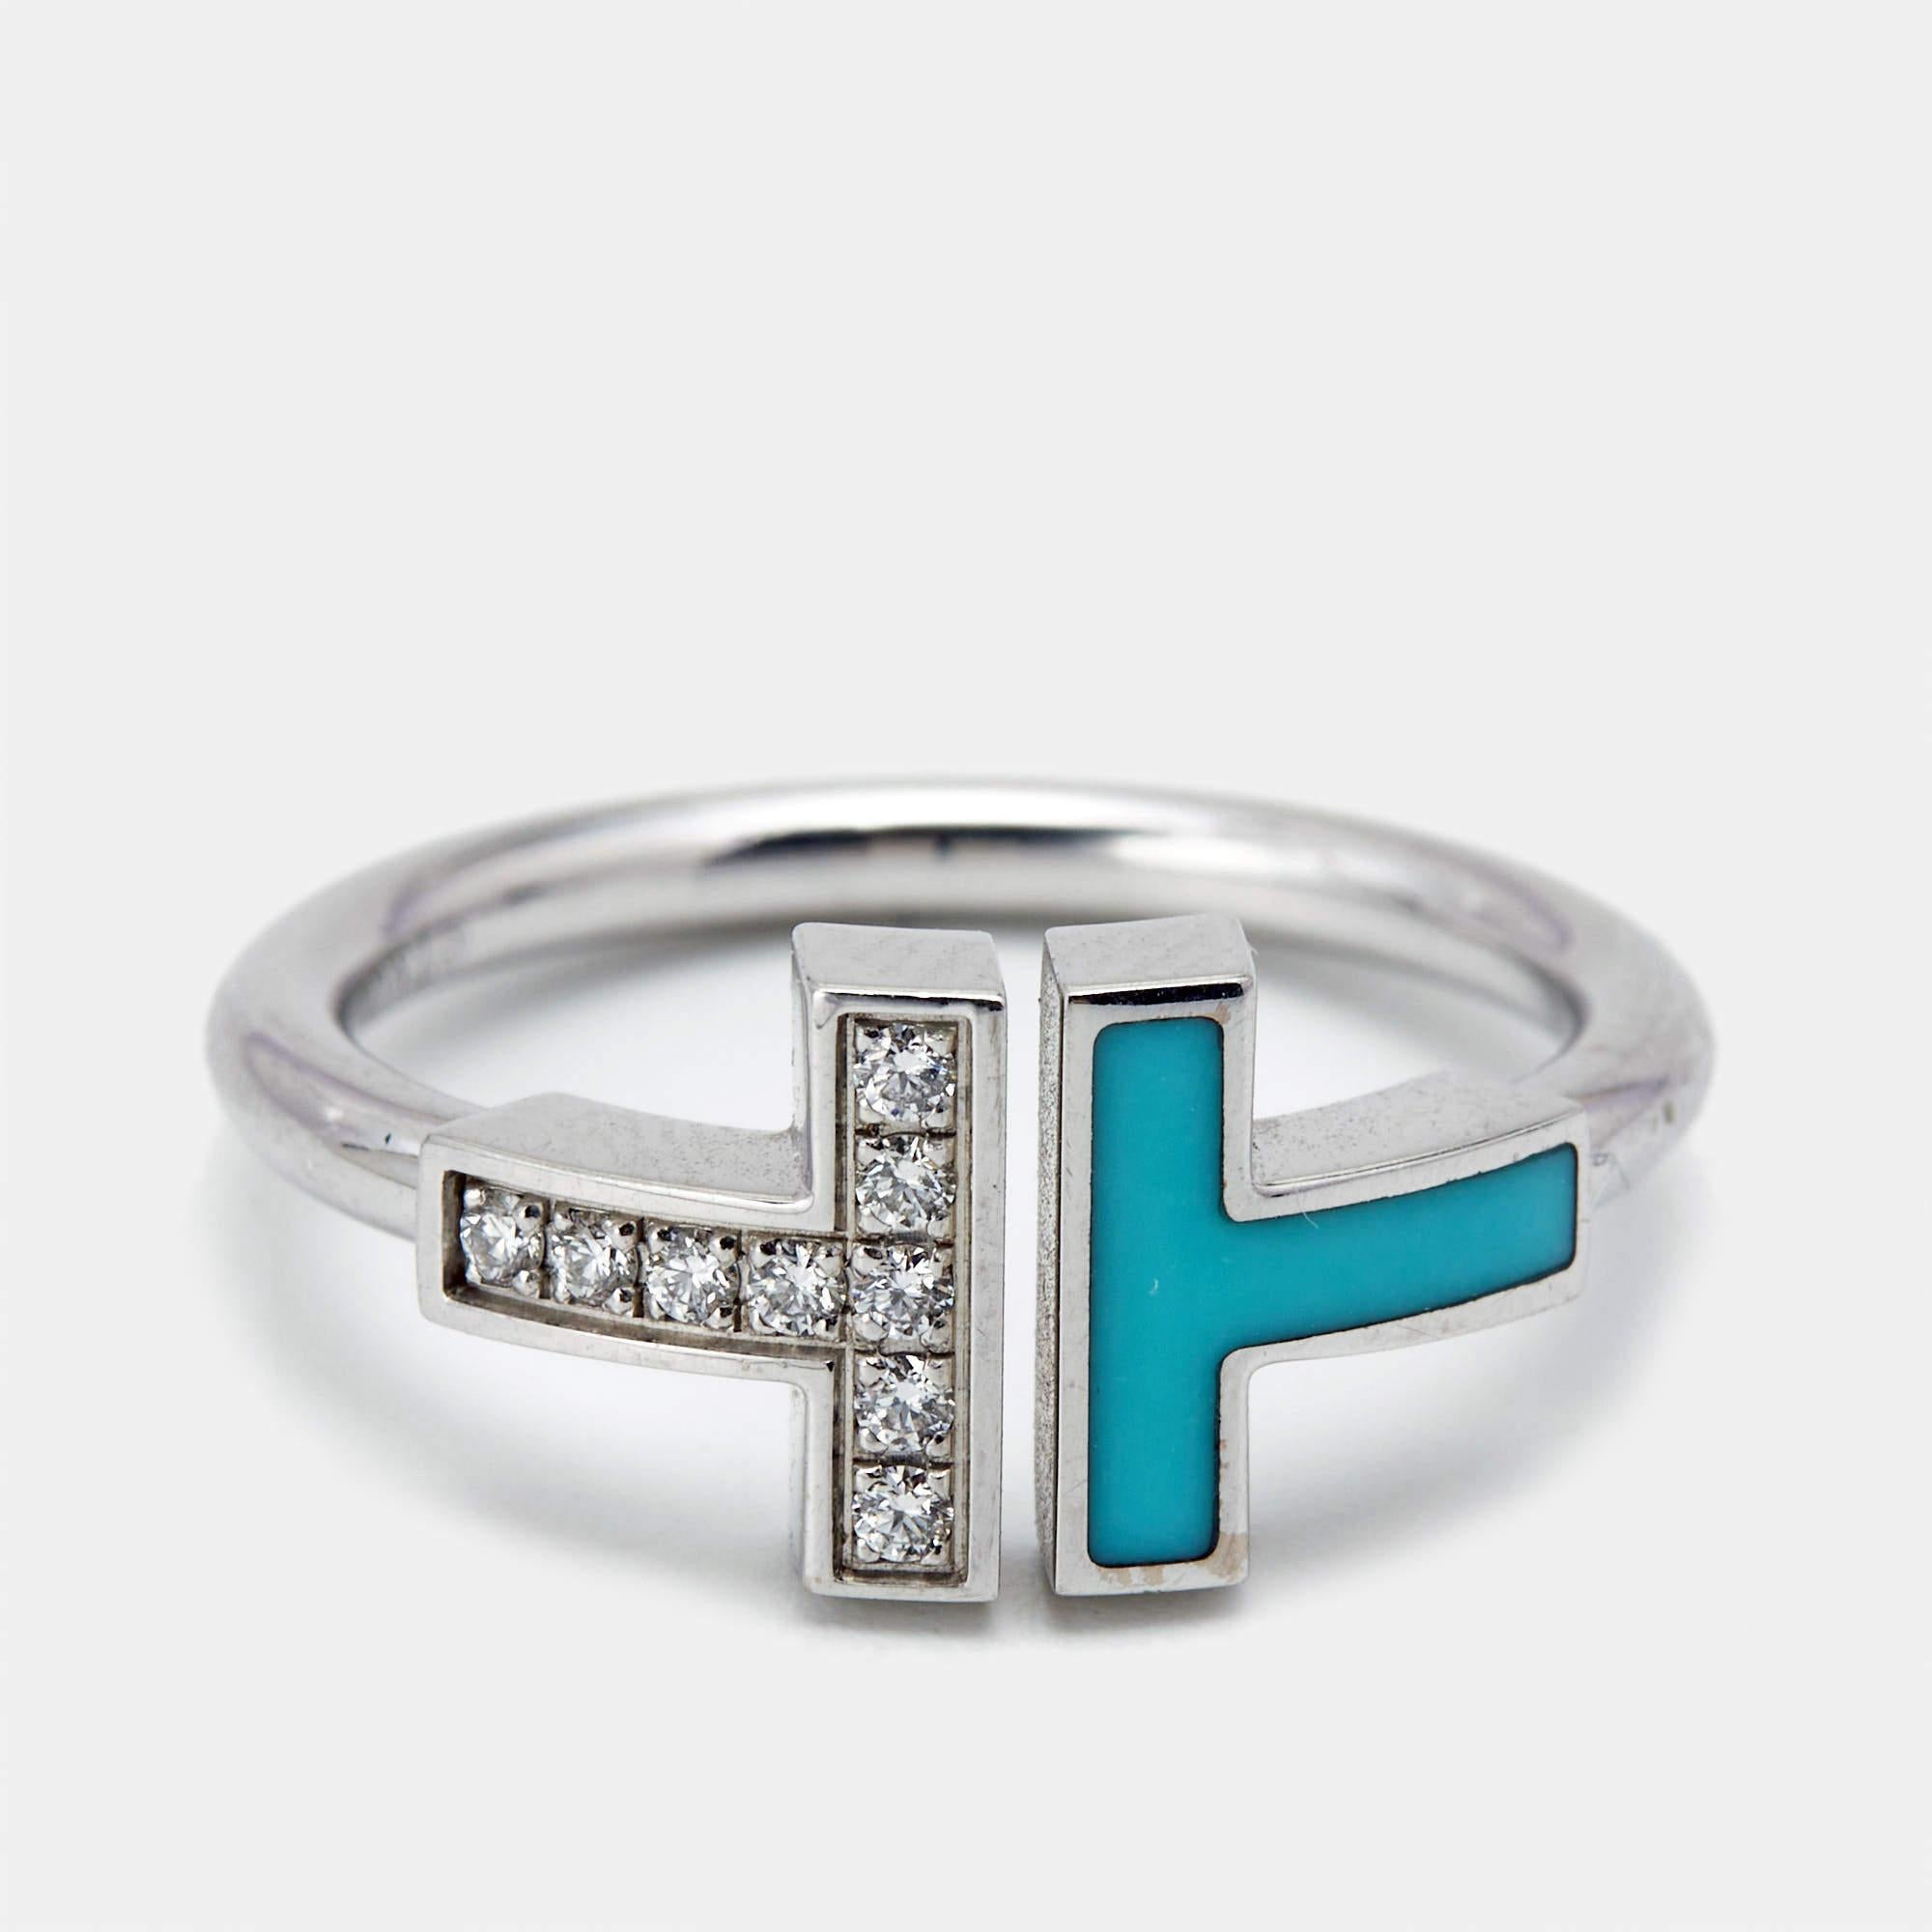 A grand ring by Tiffany & Co. that promises to stand out on your hand. It is a masterfully crafted piece of jewelry that embodies timeless luxury and sophisticated elegance.

